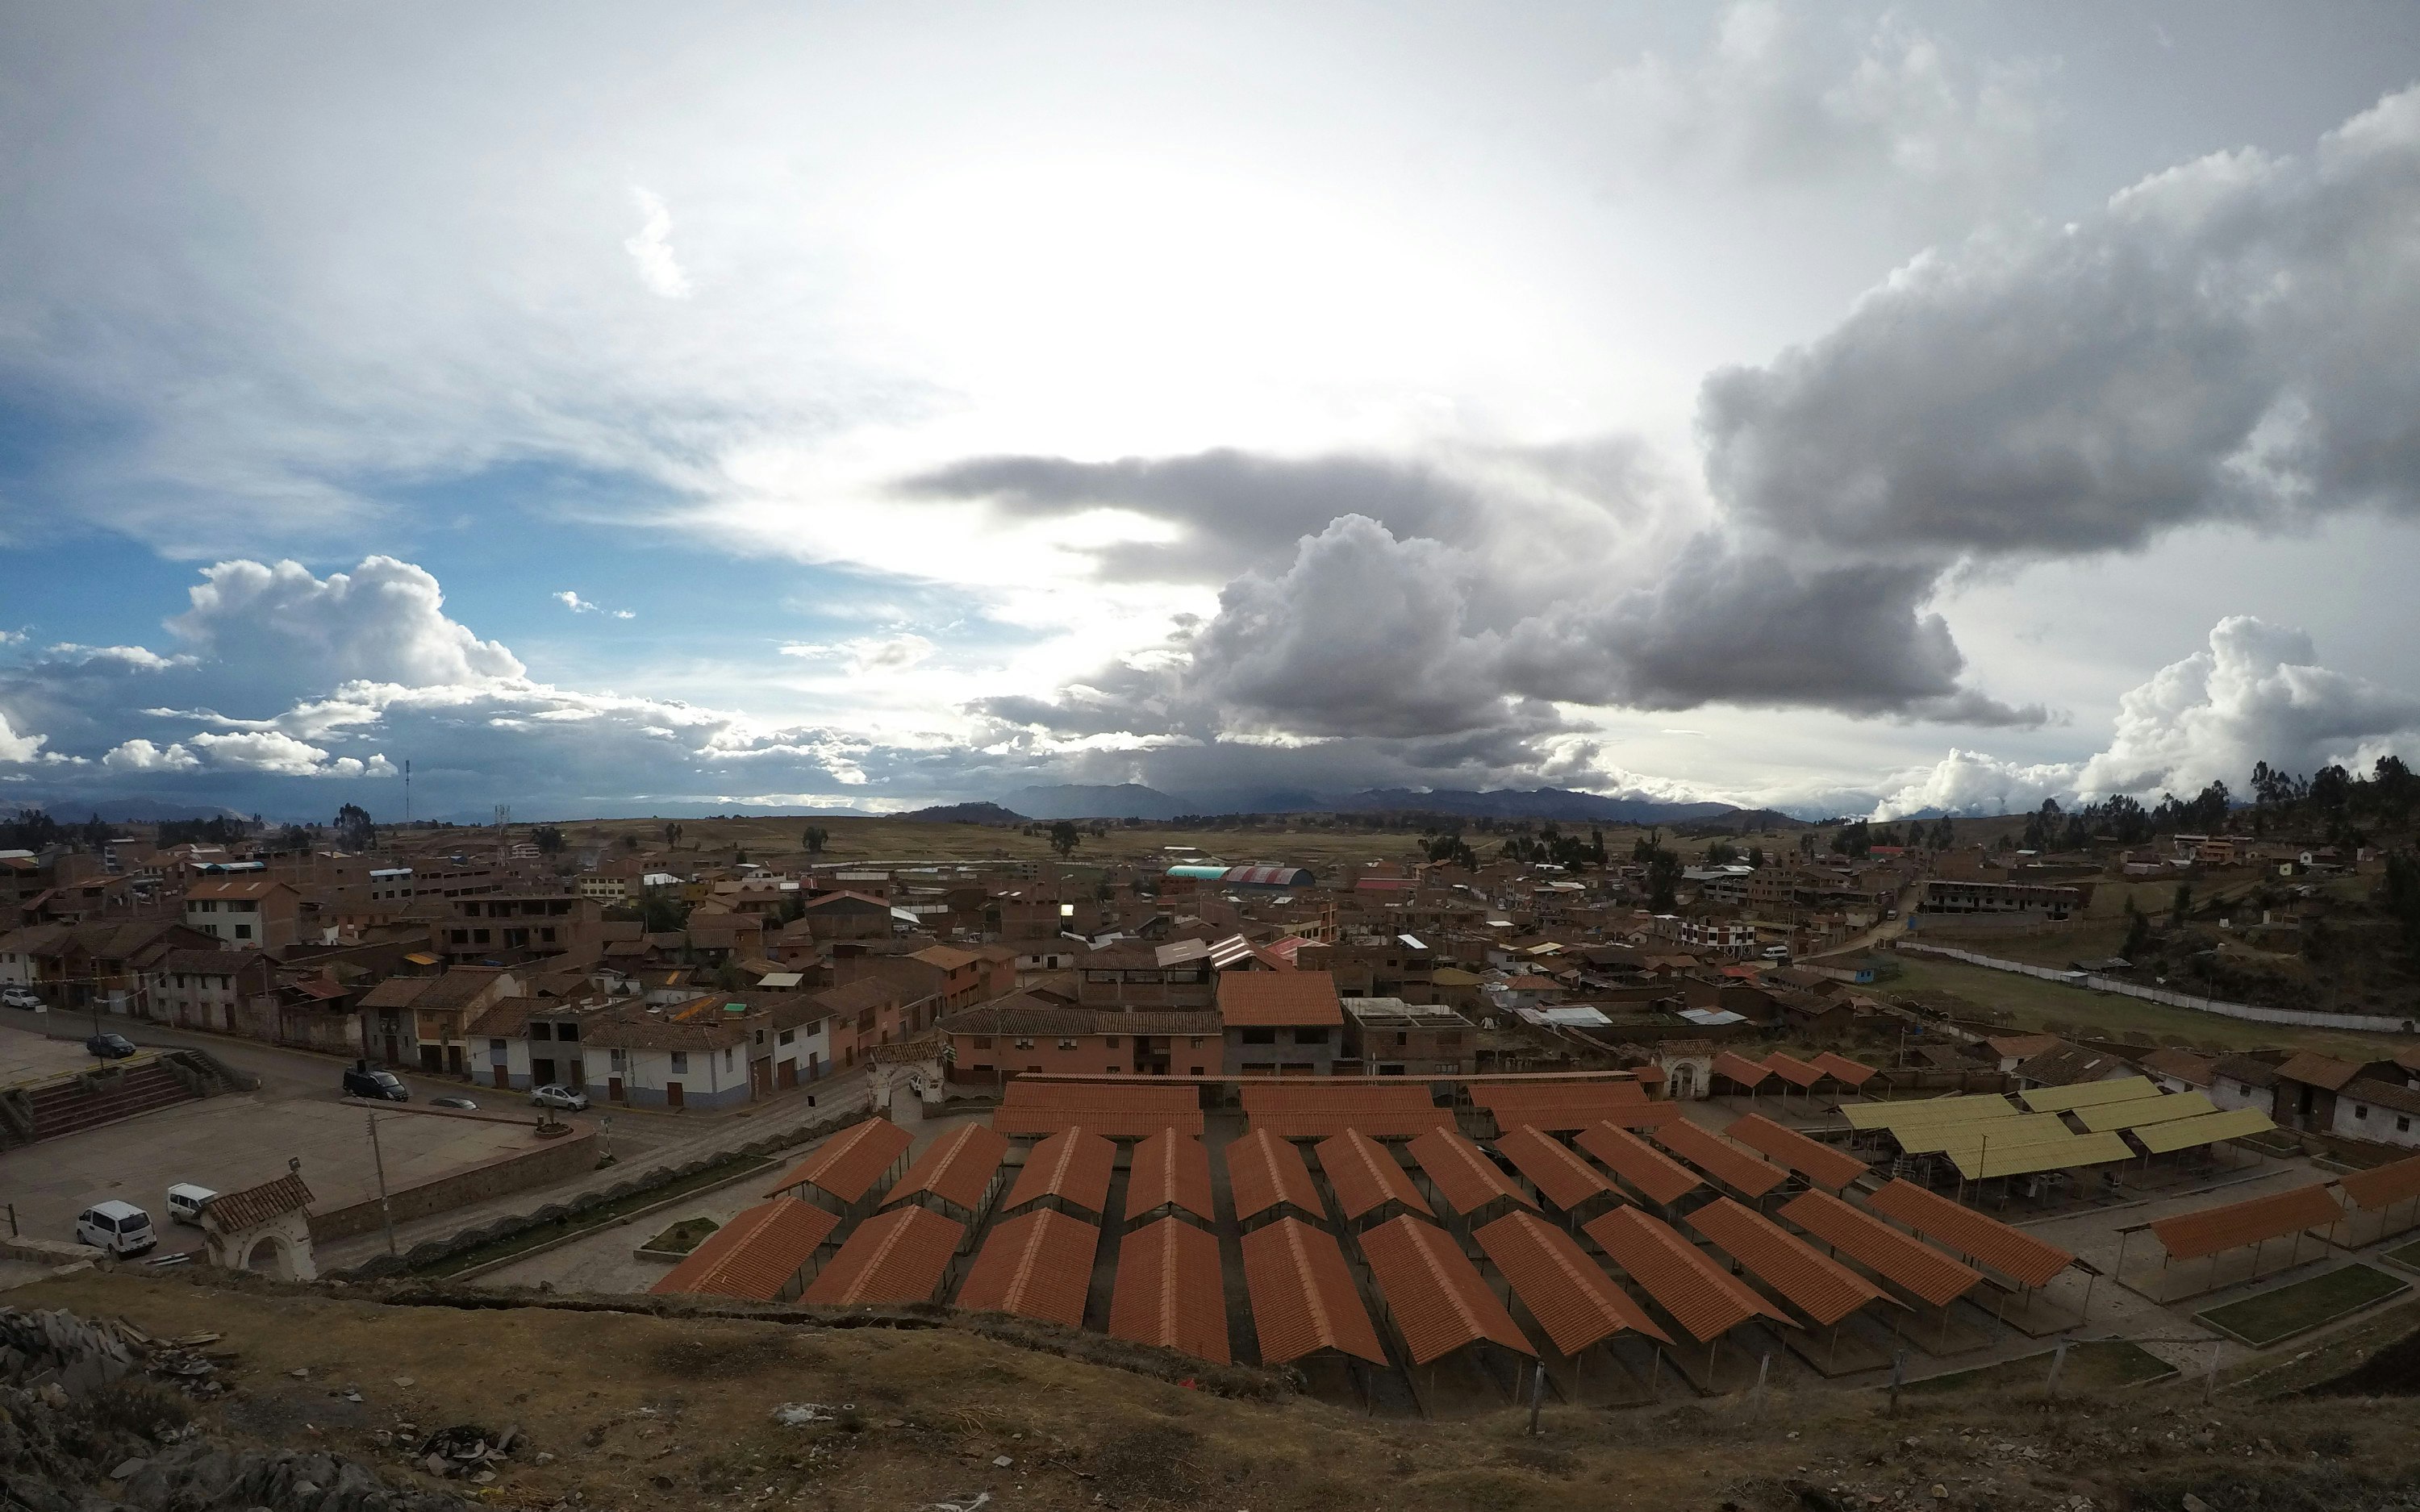 A view of Chinchero from red rooftops